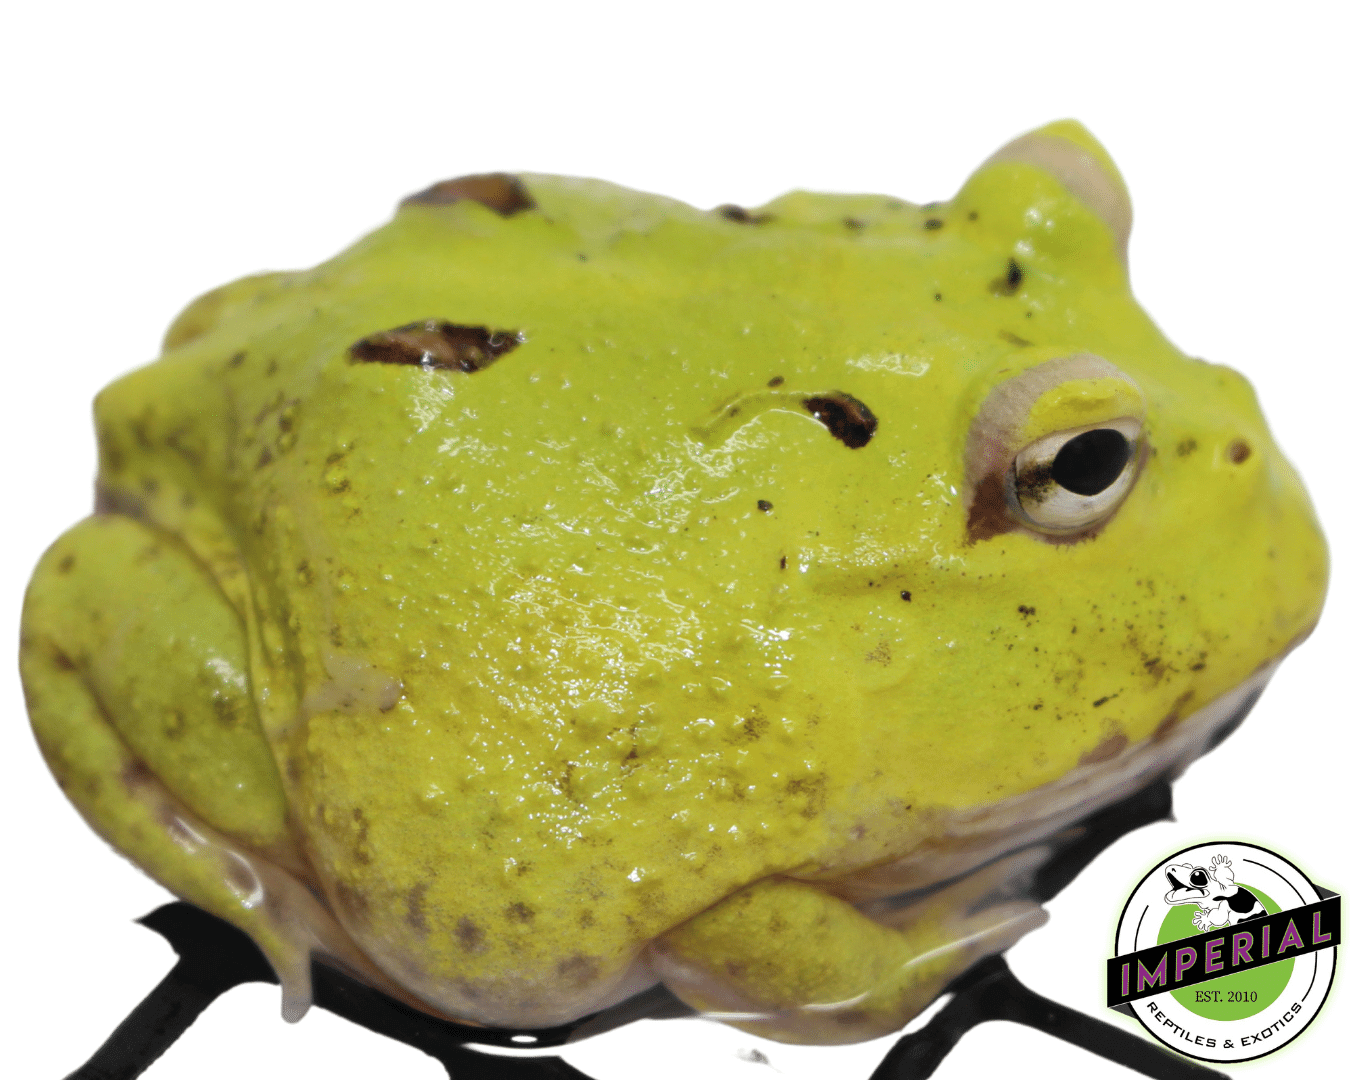 patternless pacman frog for sale, buy amphibians online